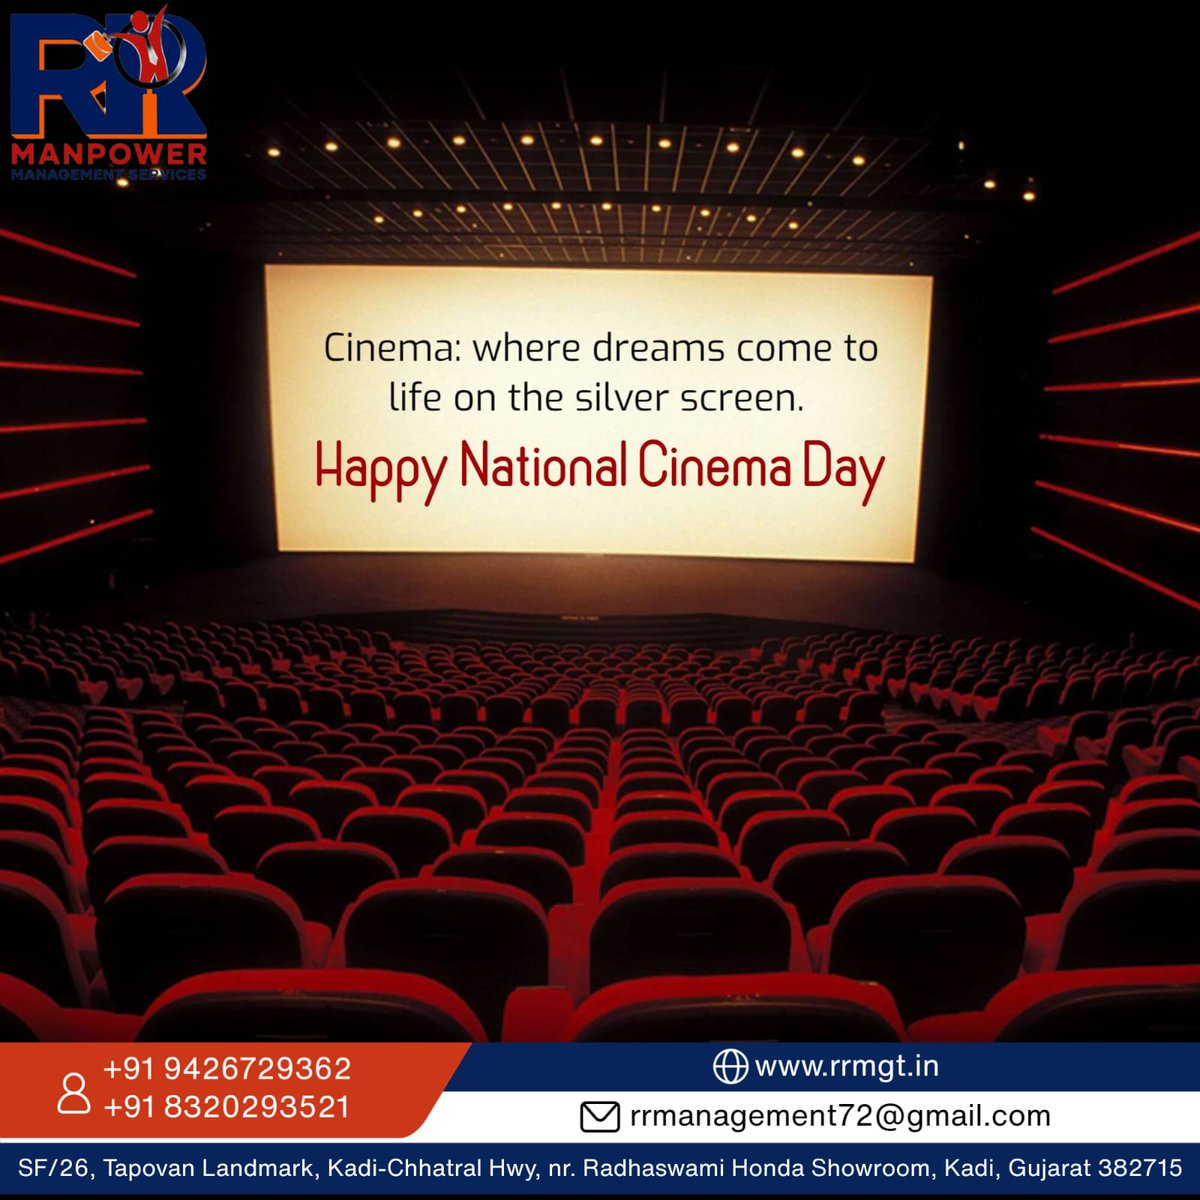 🎥 Lights, Camera, Action! Celebrating the magic of the silver screen on #NationalCinemaDay 🍿✨ Let's embark on a cinematic journey like never before! 🎬

#MovieMagic #CinemaDayDelights #SilverScreenCelebration #MovieMania #CinephileChronicles #rrmgtkadi #rrmanpowerjobs